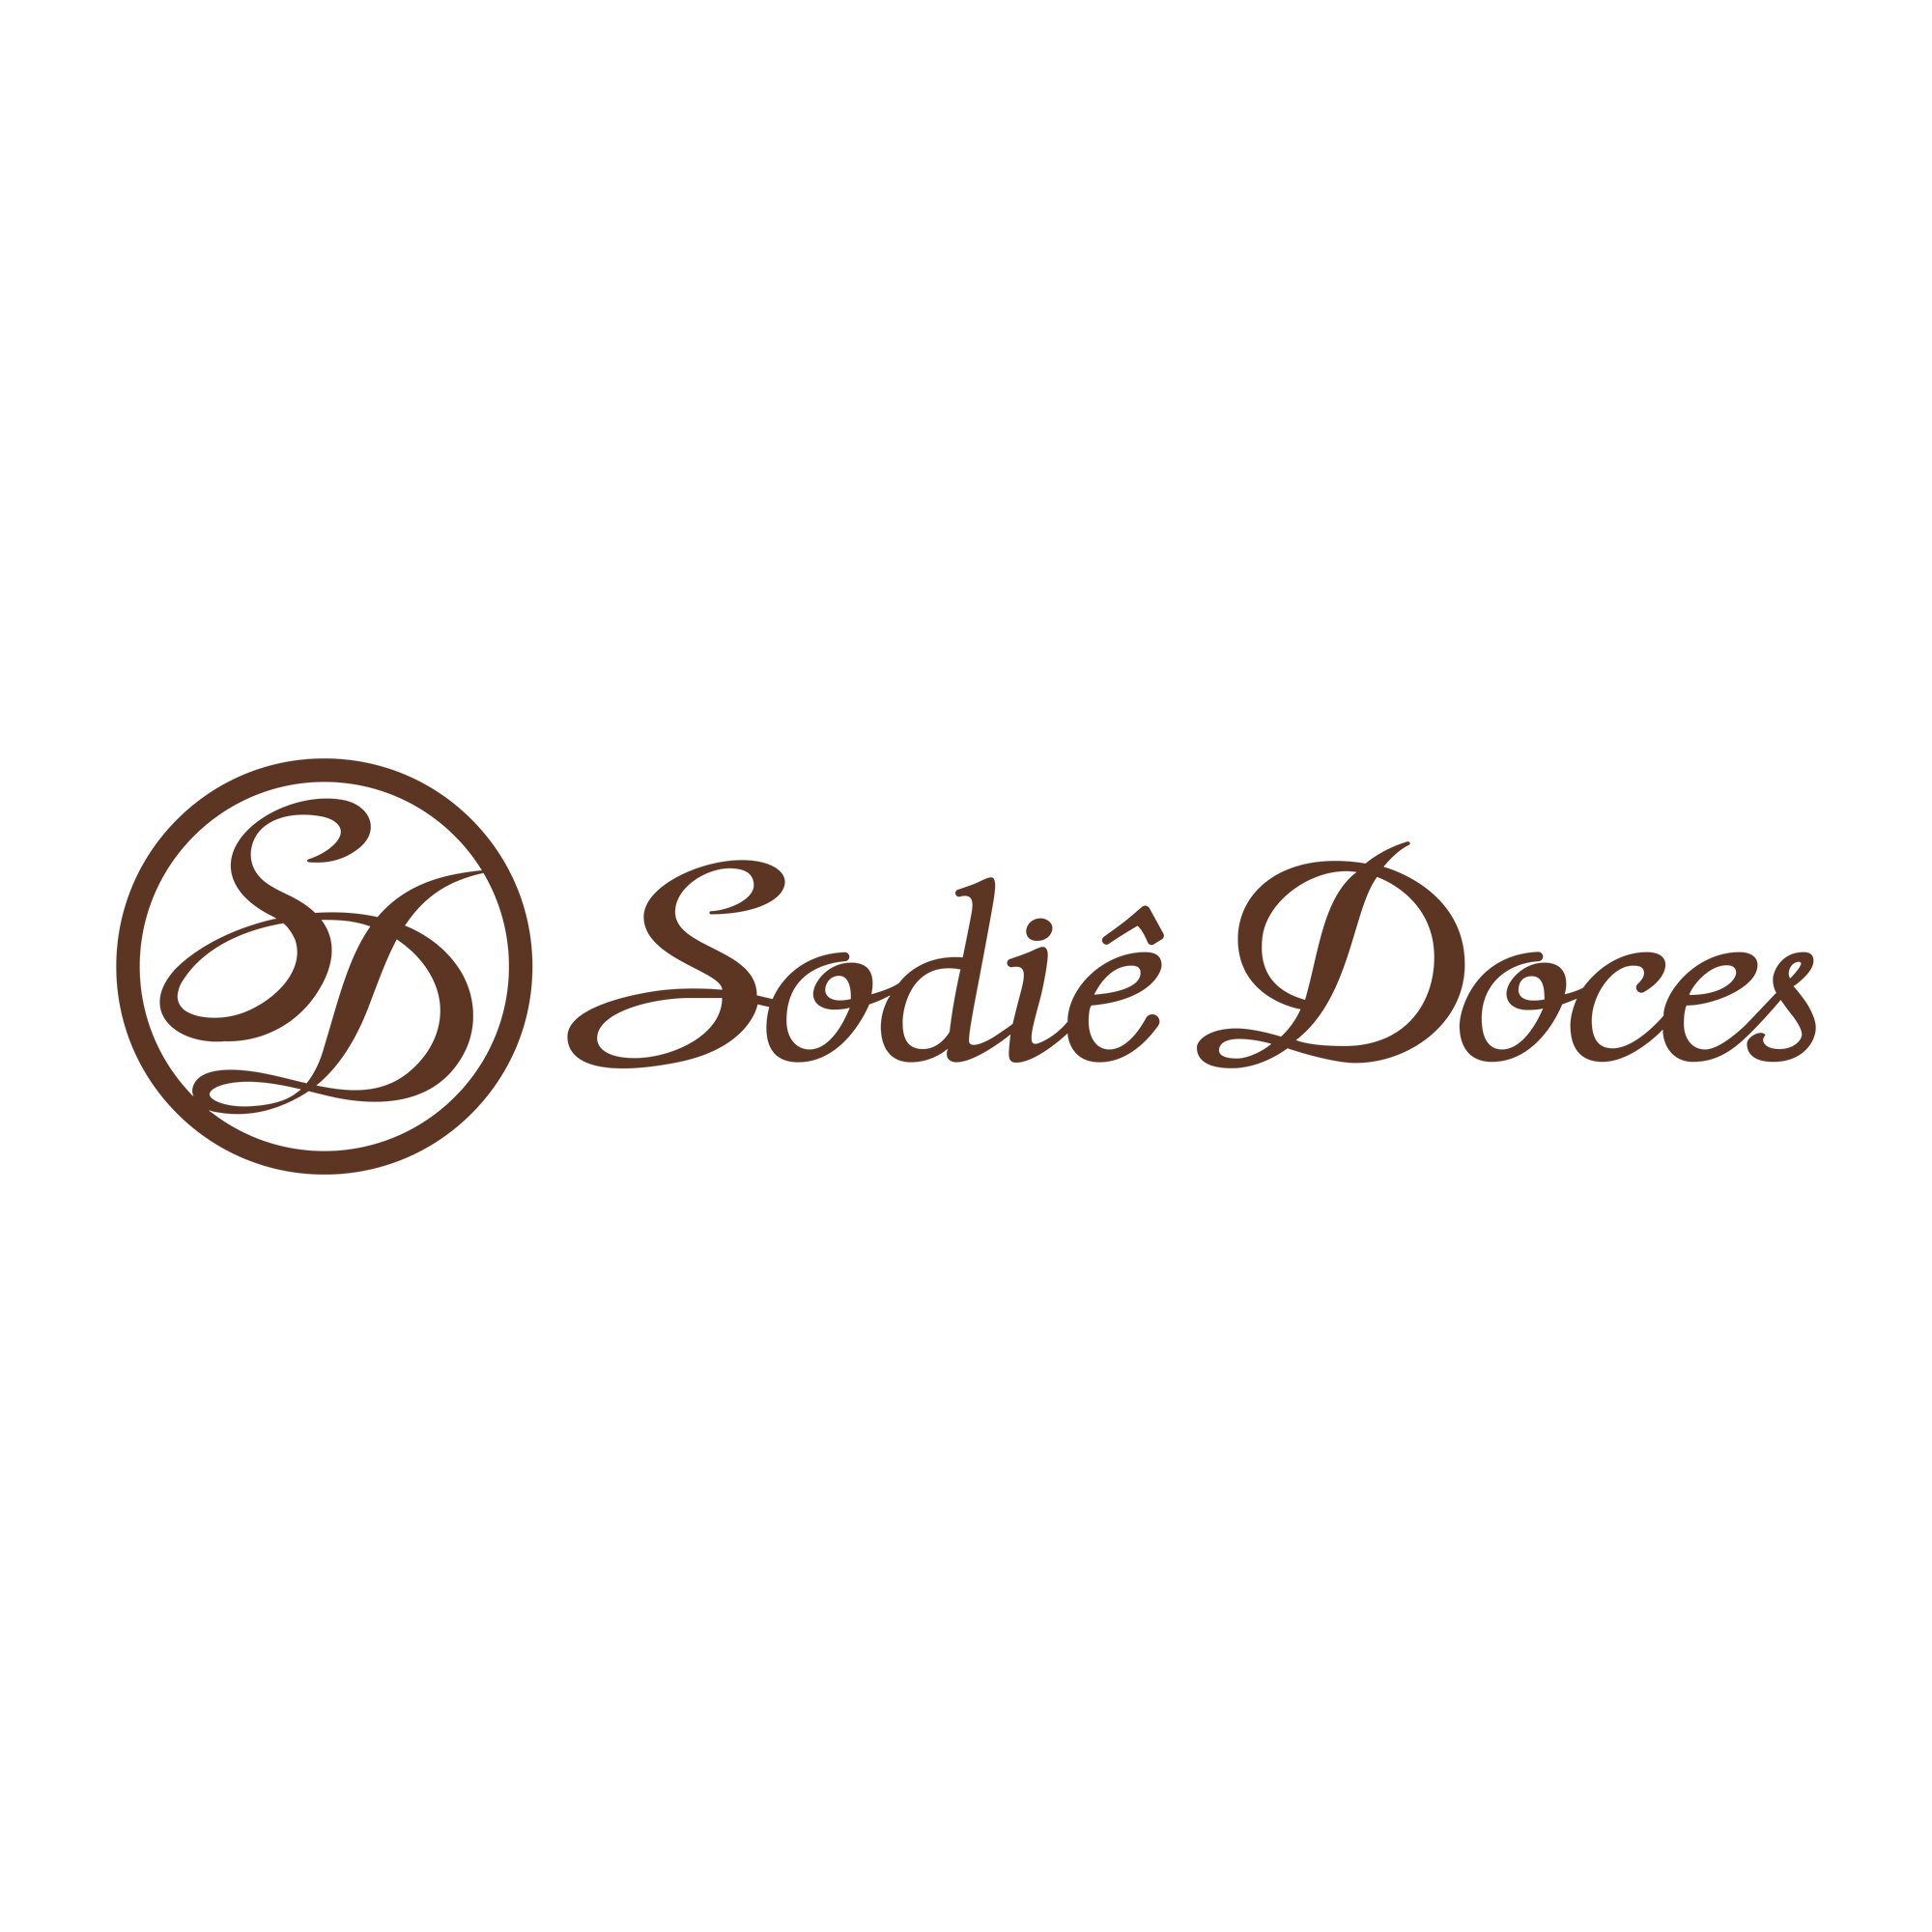 Sodie Doces